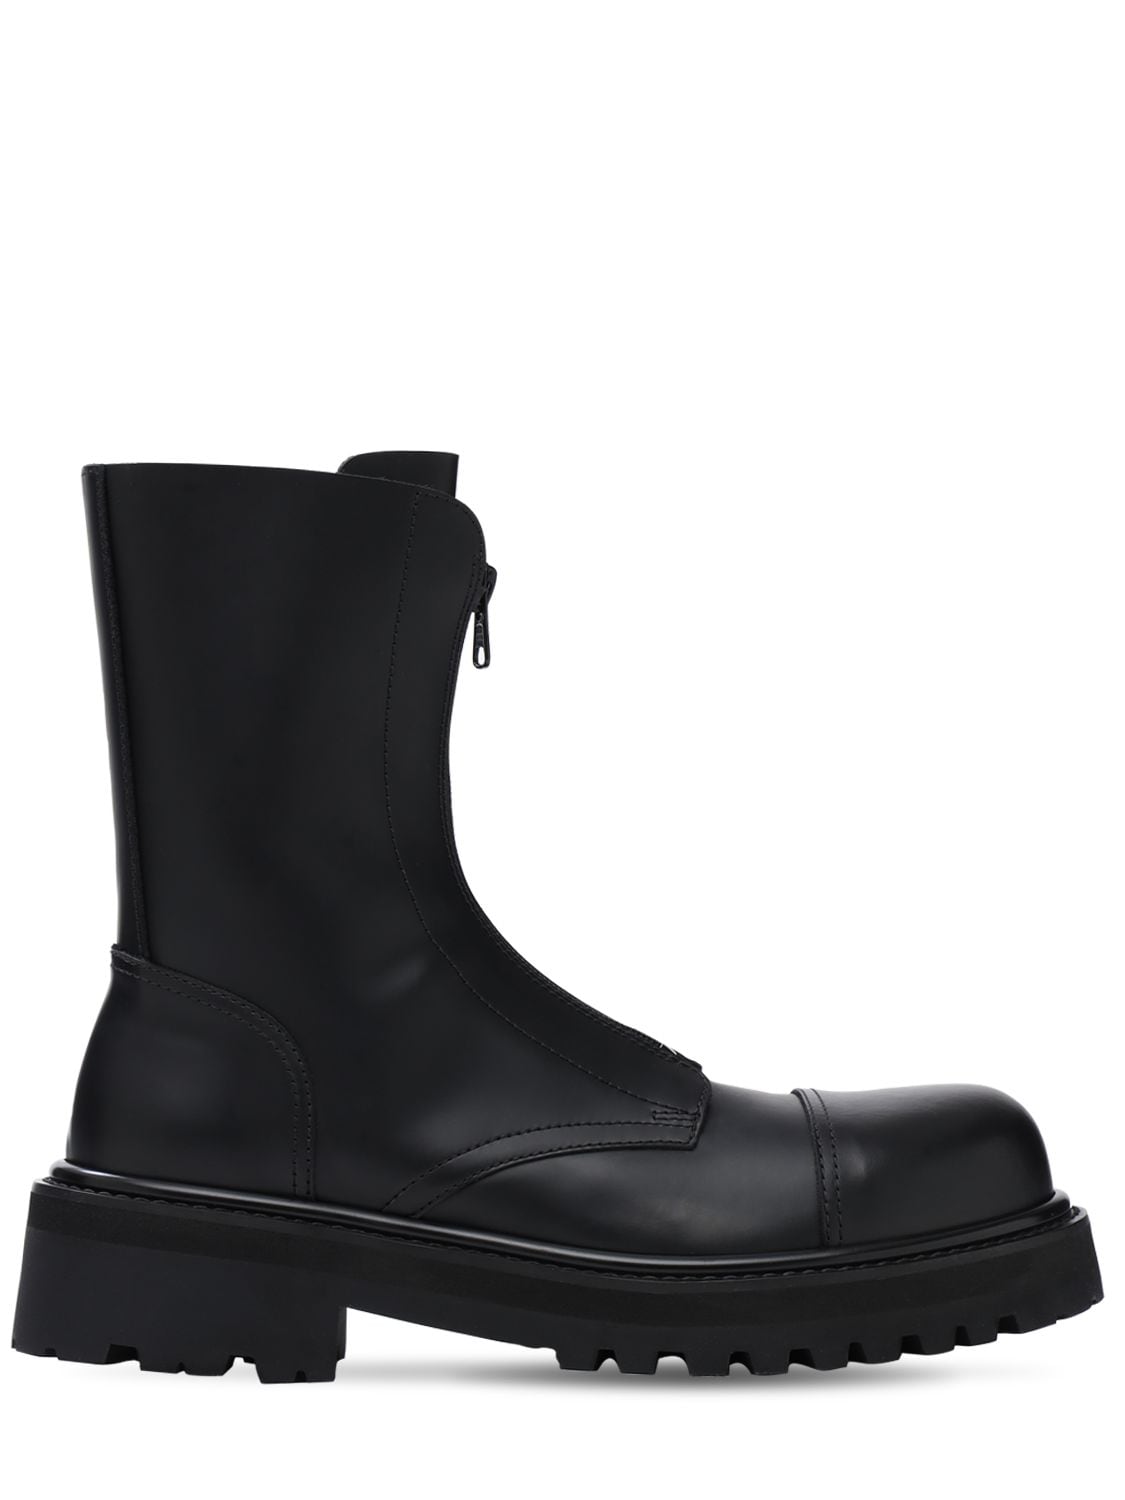 VETEMENTS ZIP-UP POLICE LEATHER ANKLE BOOTS,72IWVA003-QKXBQ0S1